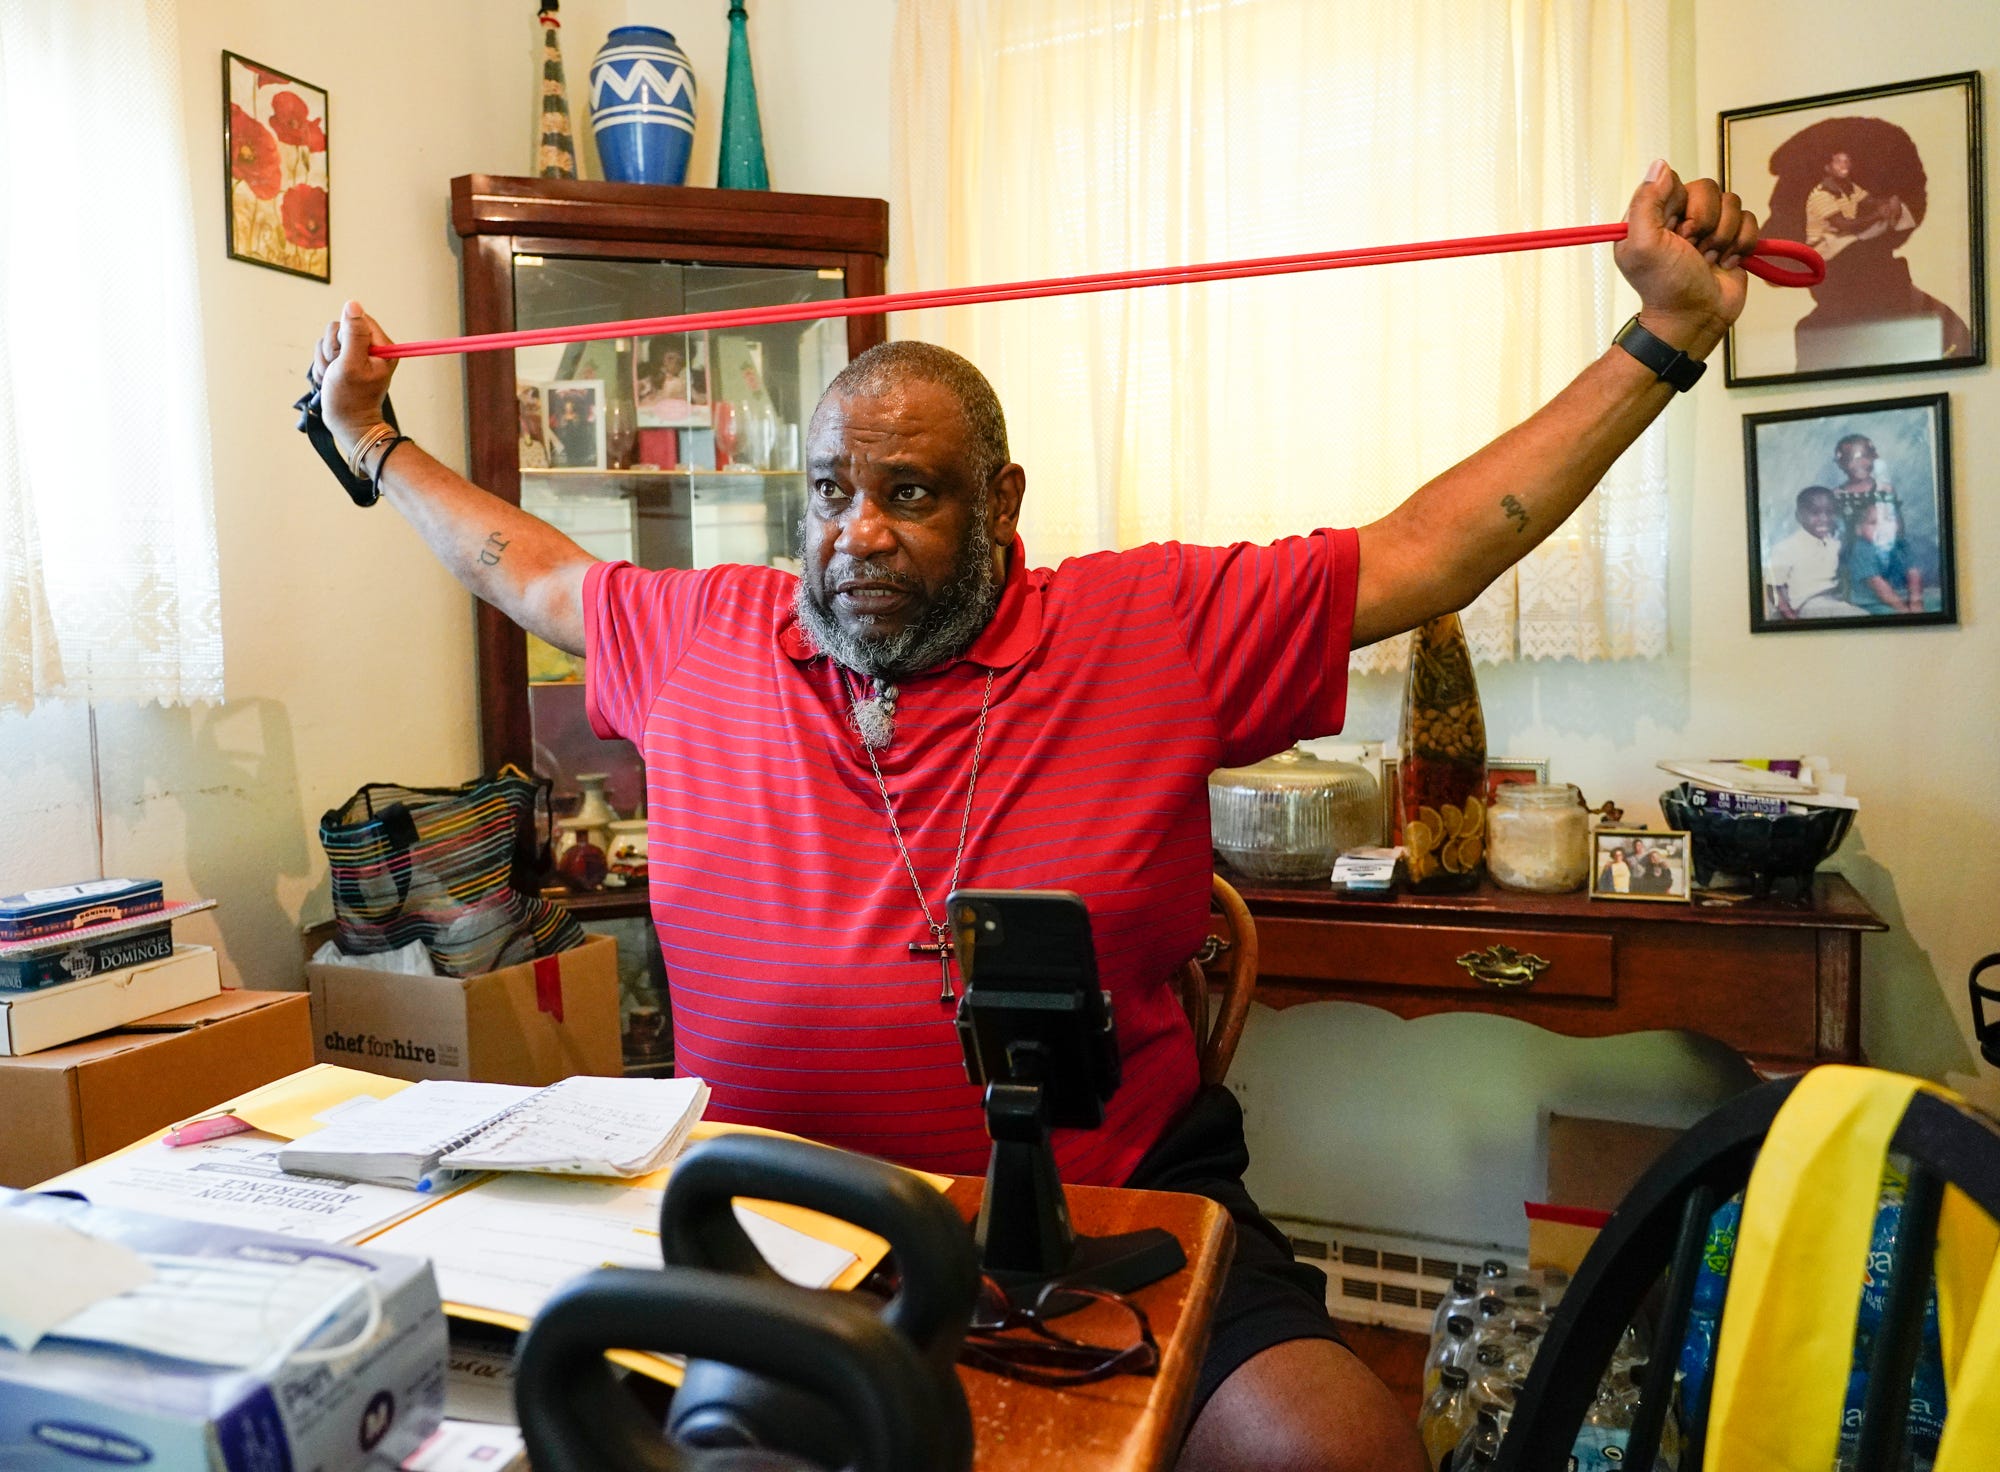 At his Indianapolis home, Nathaniel Brown demonstrates stretch band exercises he learned through a virtual health class.